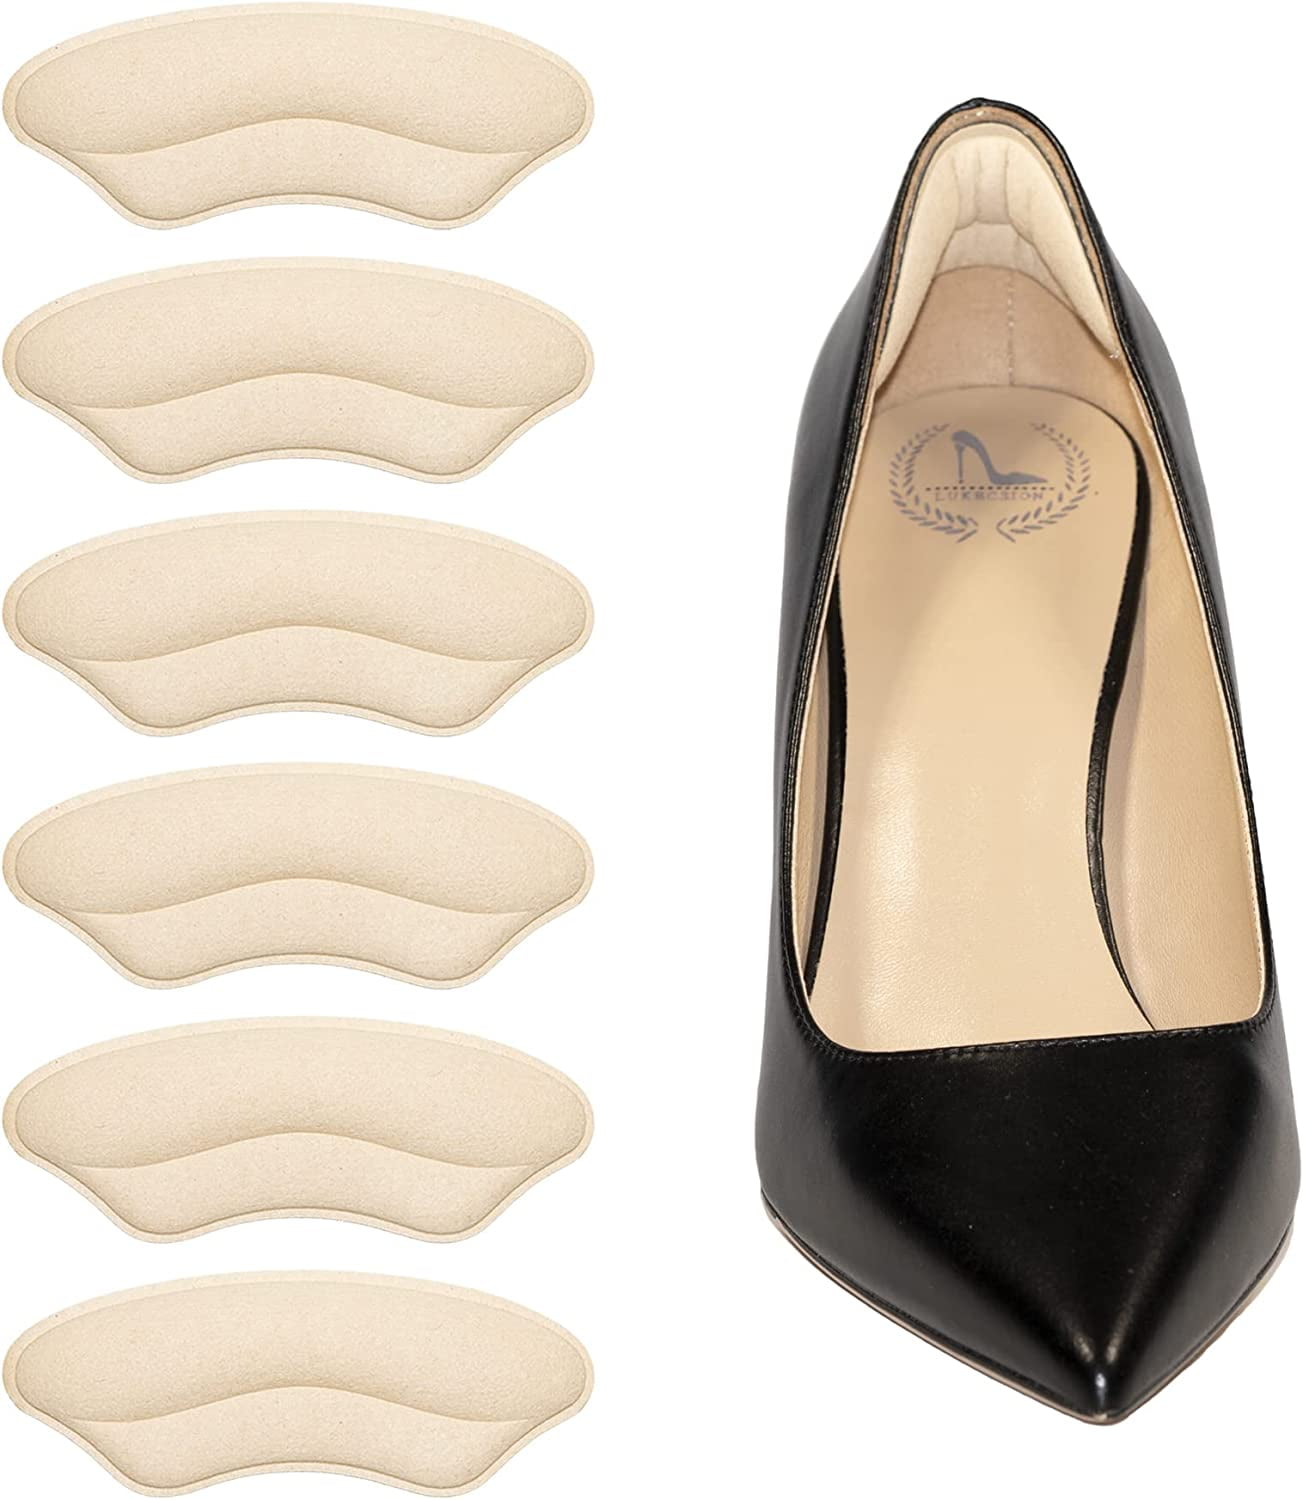 Heel Cushion Inserts Heel Cuffs Self Adhesive Slip Prevention Silicone  Insoles for High Heels or Shoes - Walmart.com